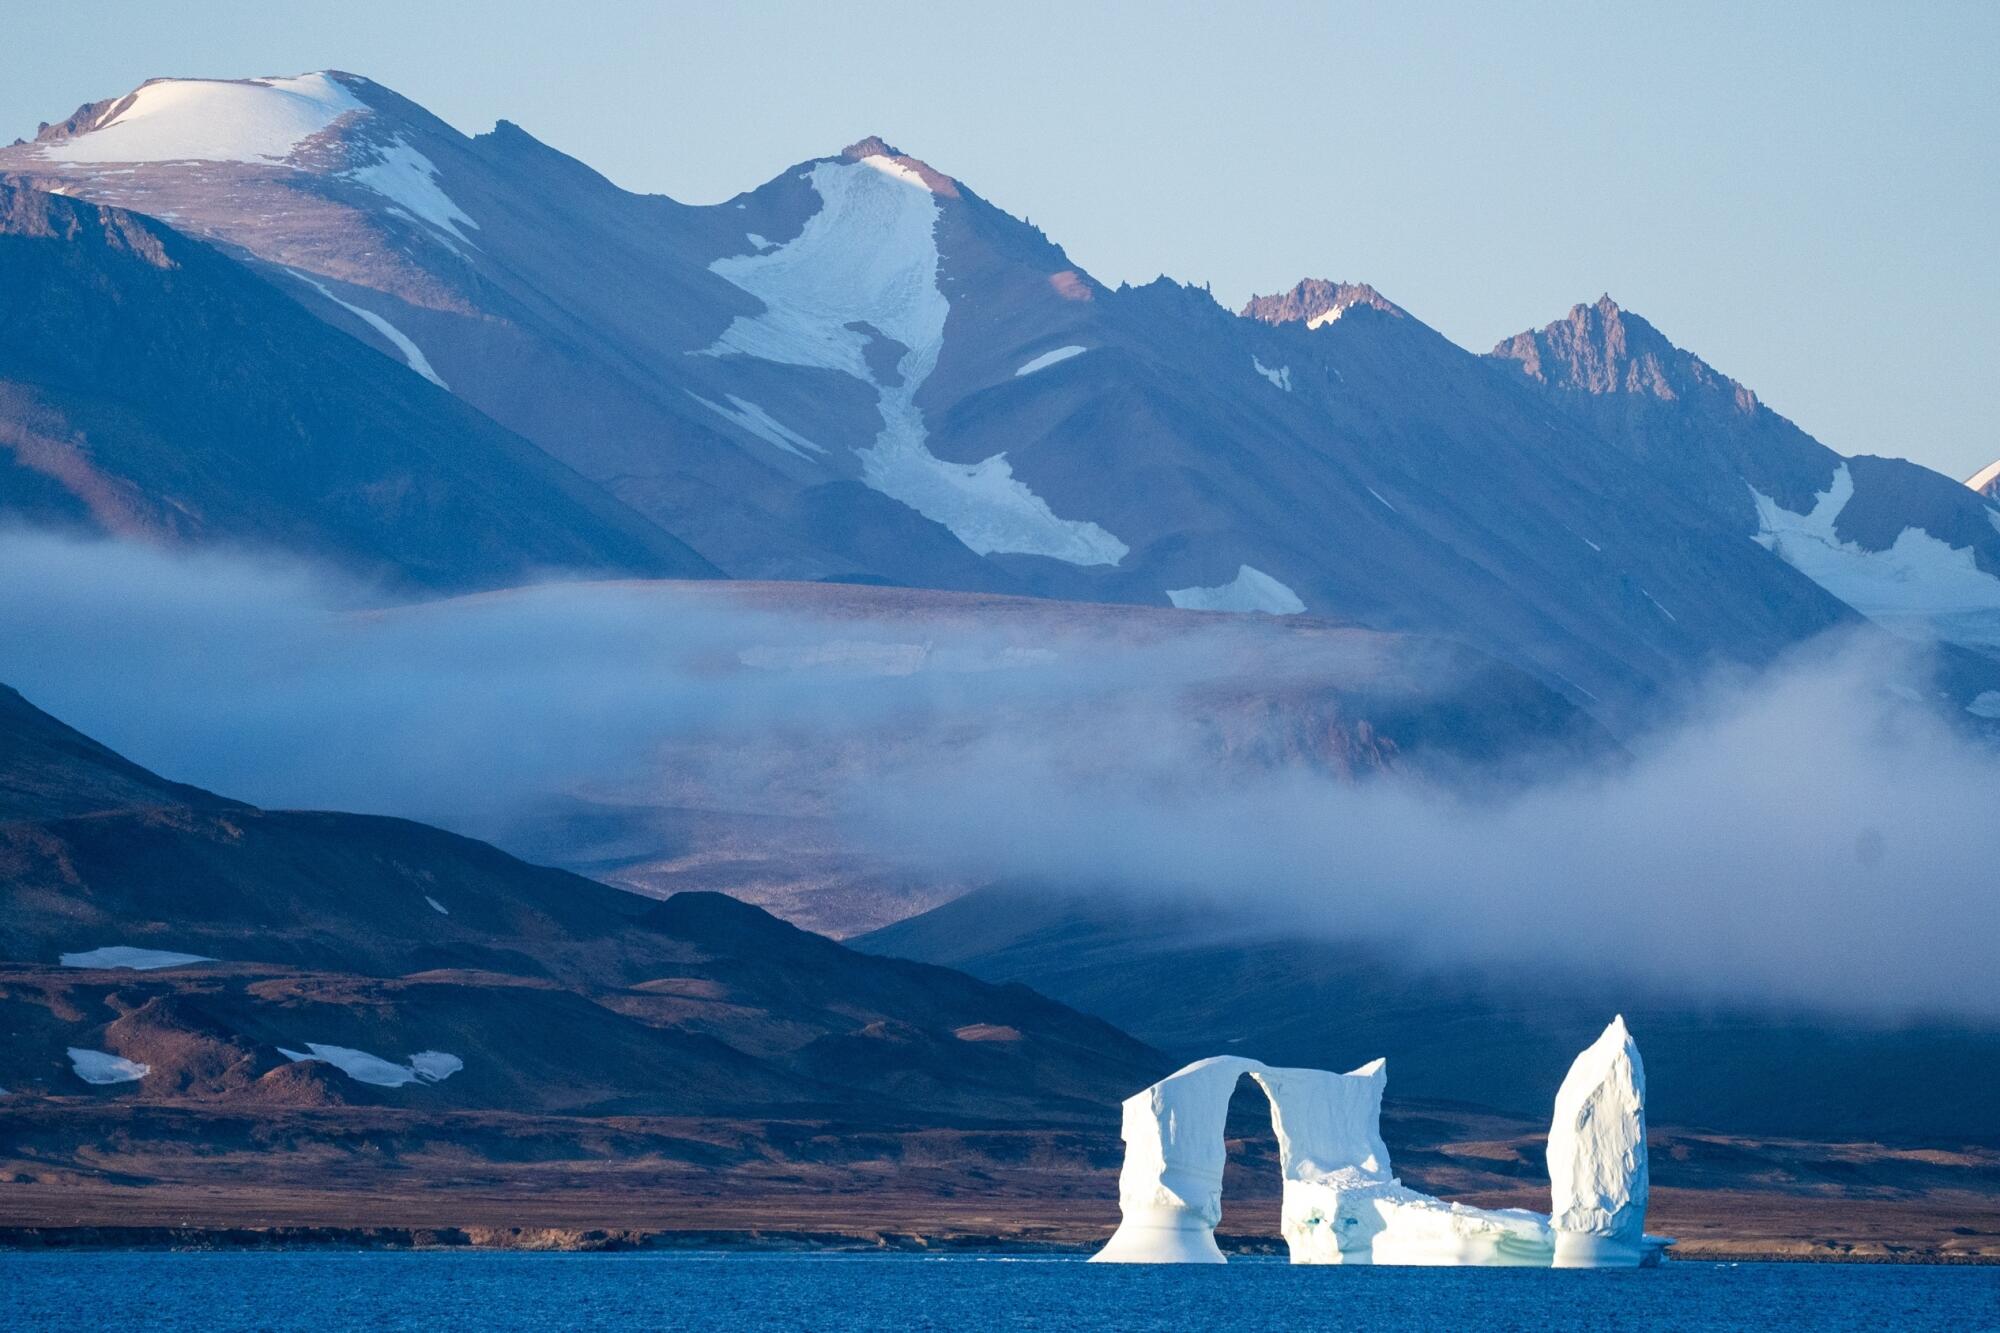 An iceberg floats in the sea as mountains rise in the background.